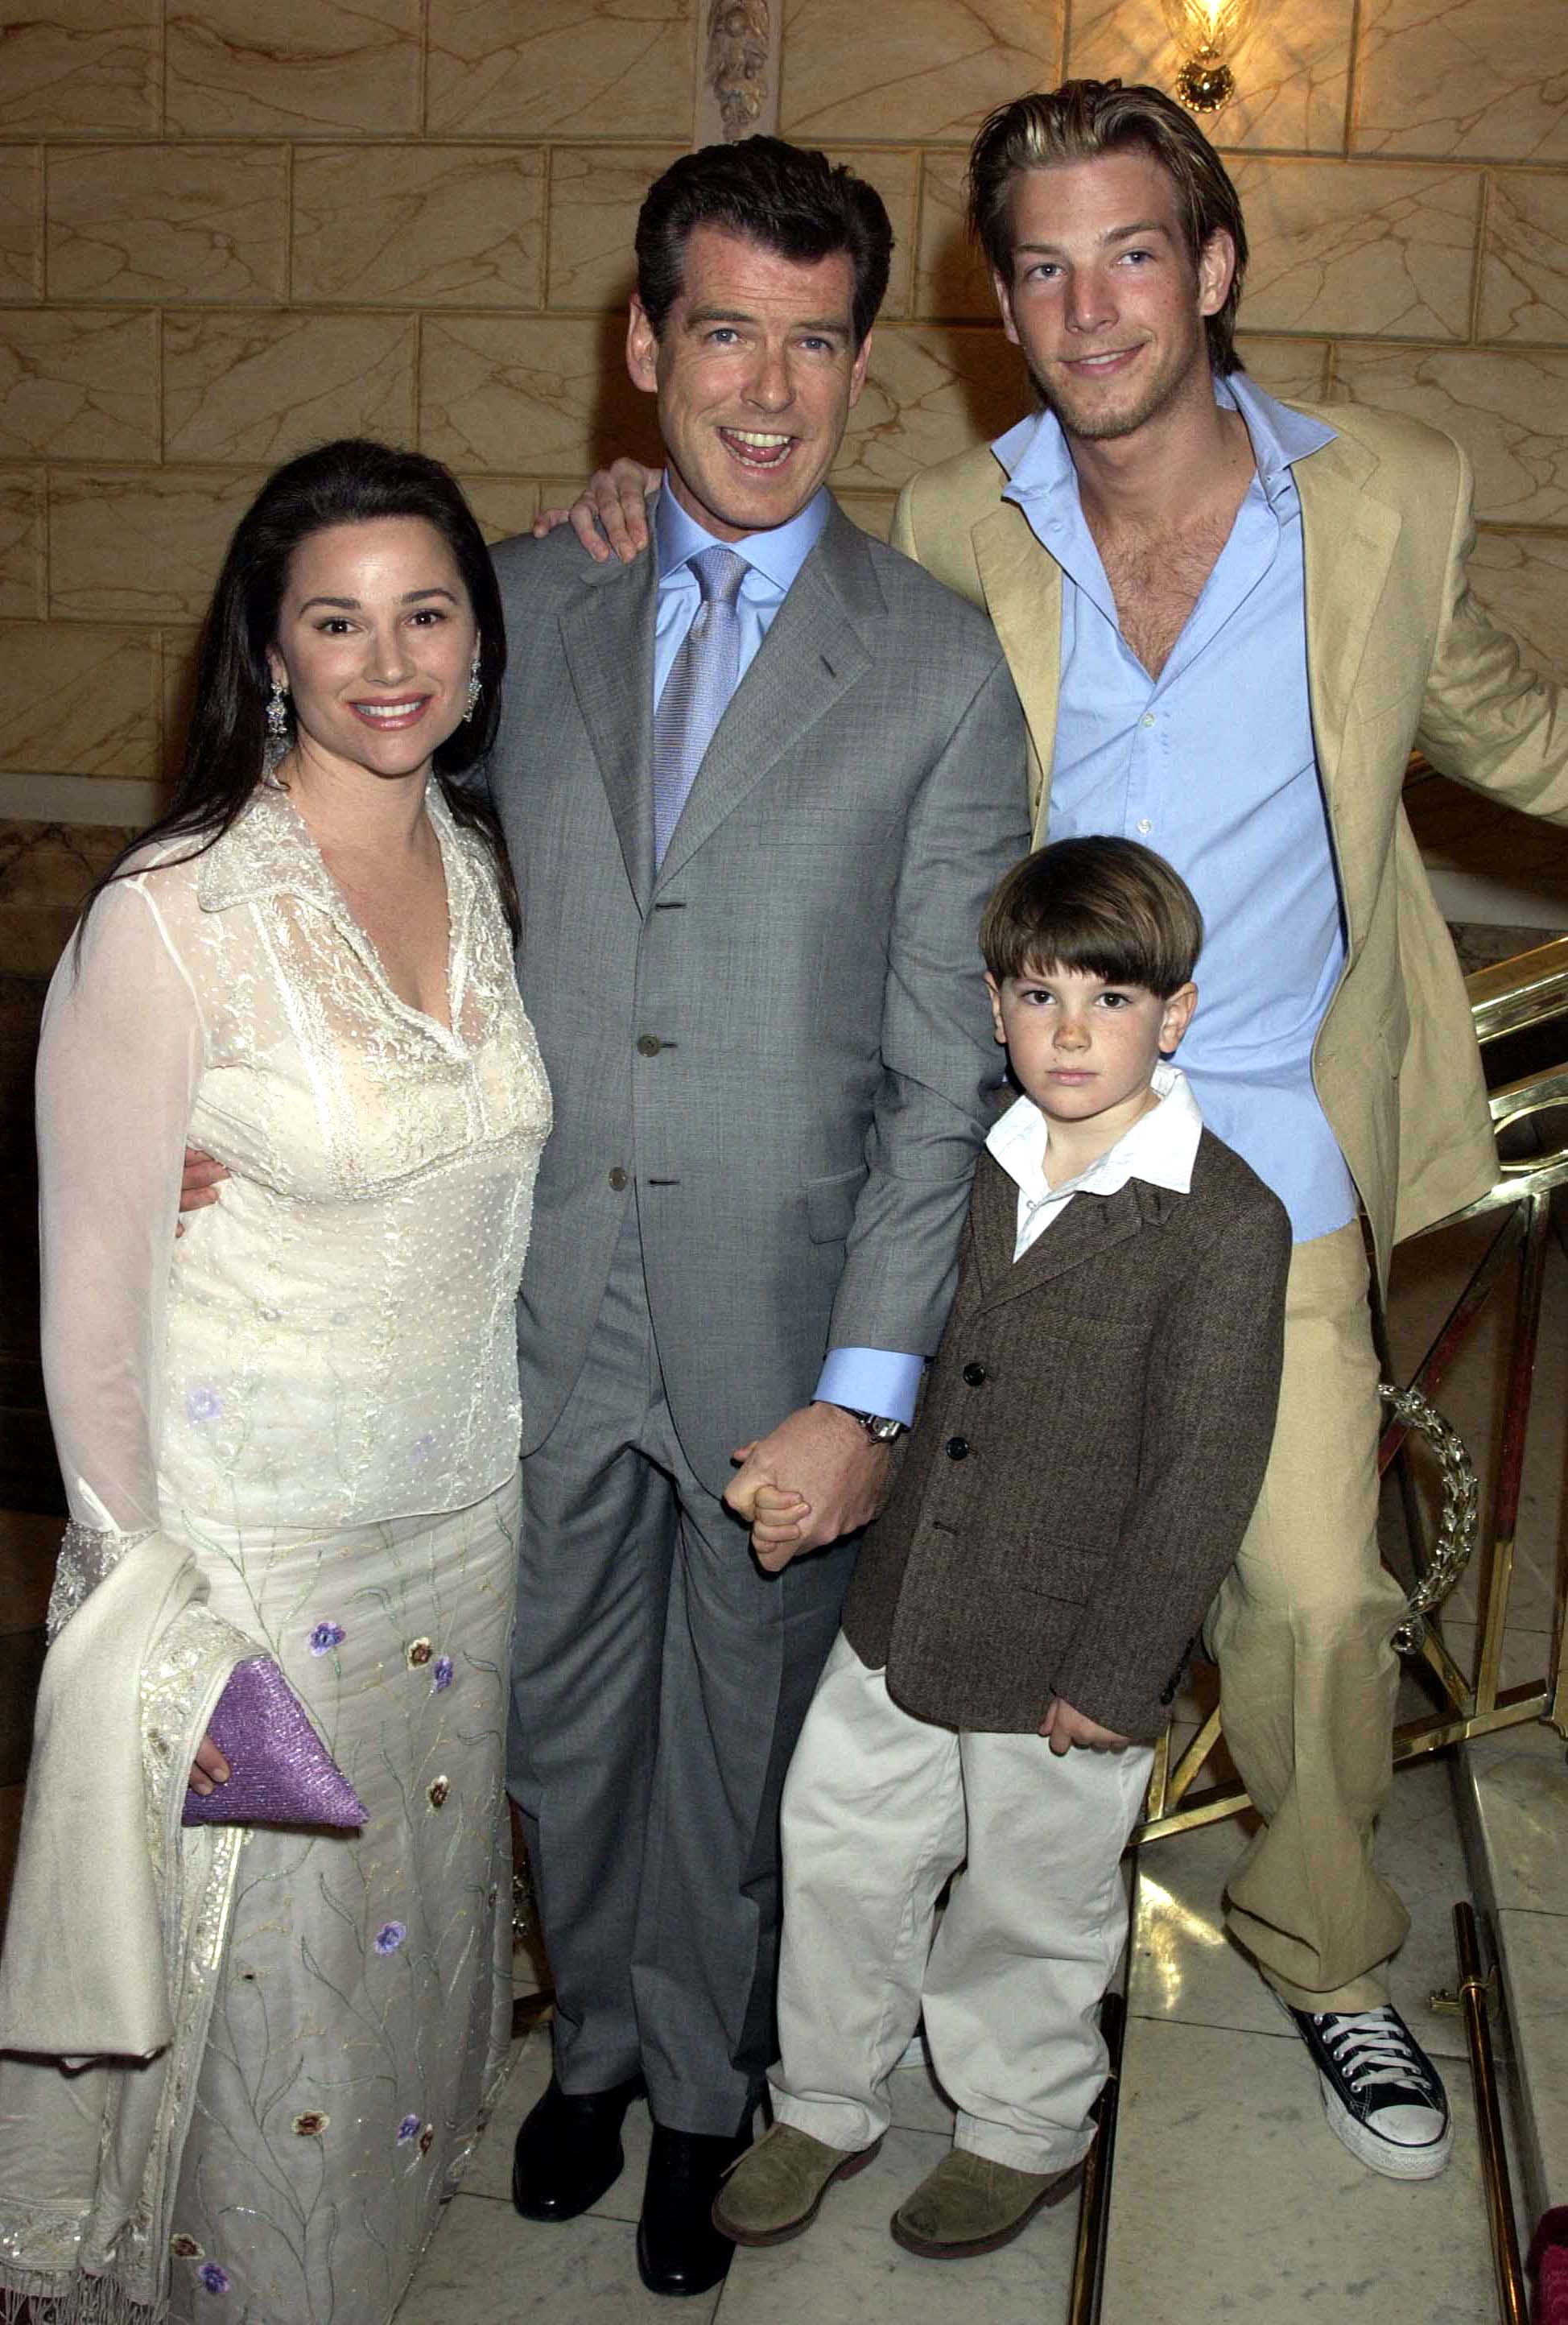 Keely Shaye Smith, Pierce Brosnan, Dylan Brosnan, and Sean Brosnan at the "Chitty Chitty Bang Bang" opening night at The London Palladium Theatre on April 16, 2002 | Source: Getty Images